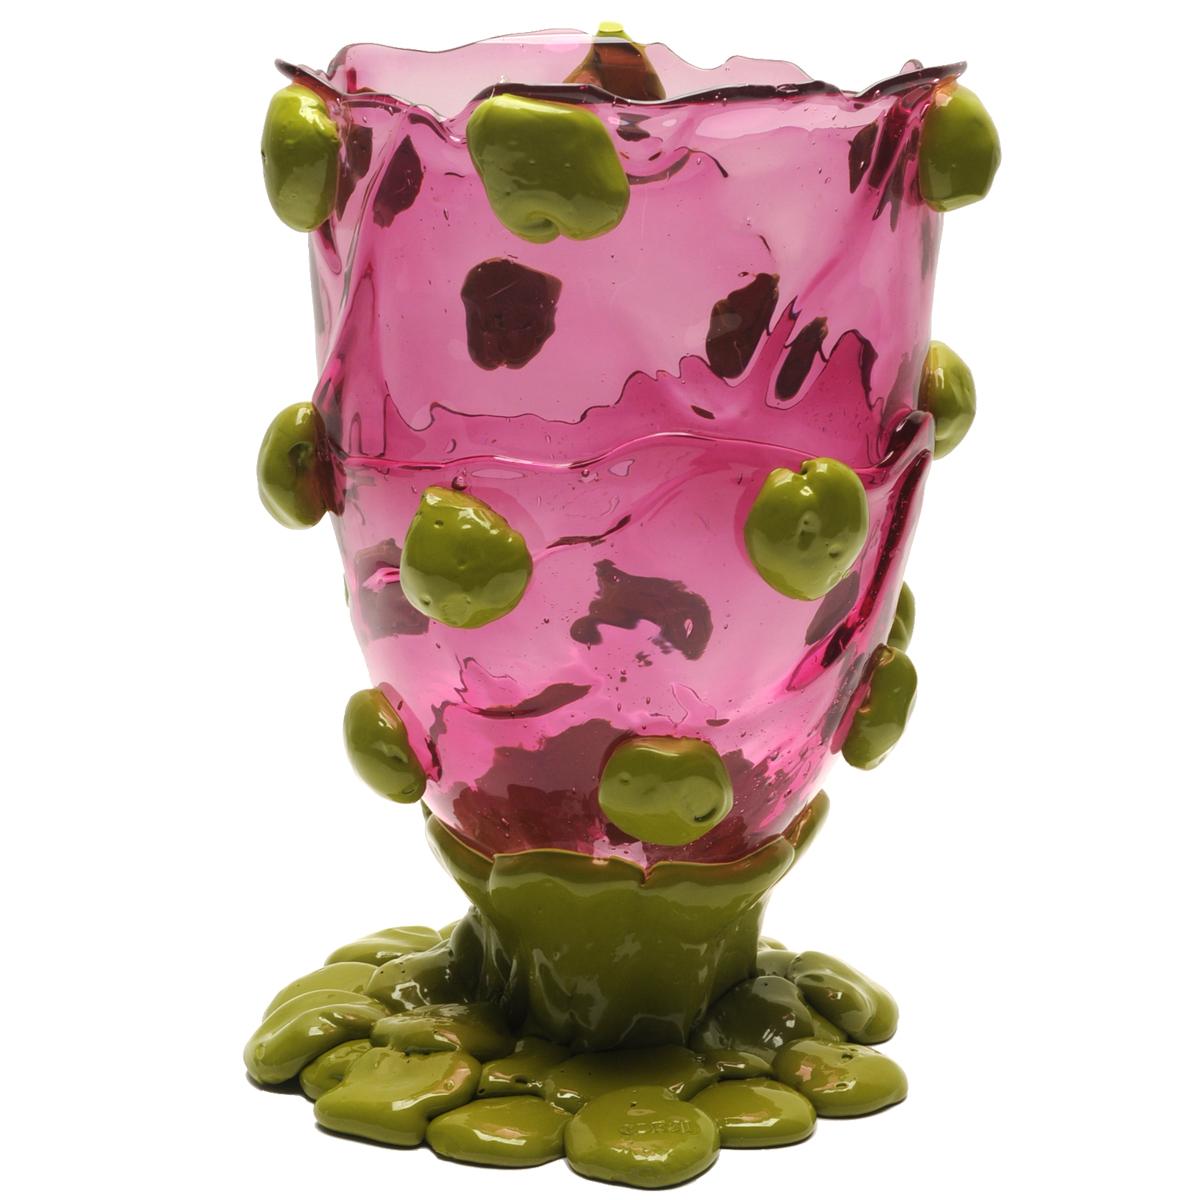 Nugget vase, clear light fuchsia, matt dust green.
Vase in soft resin designed by Gaetano Pesce in 1995 for Fish Design collection.

Measures: M - ø 16cm x H 26cm
Colours: clear light fuchsia, matt dust green.
Other sizes available.
Vase in